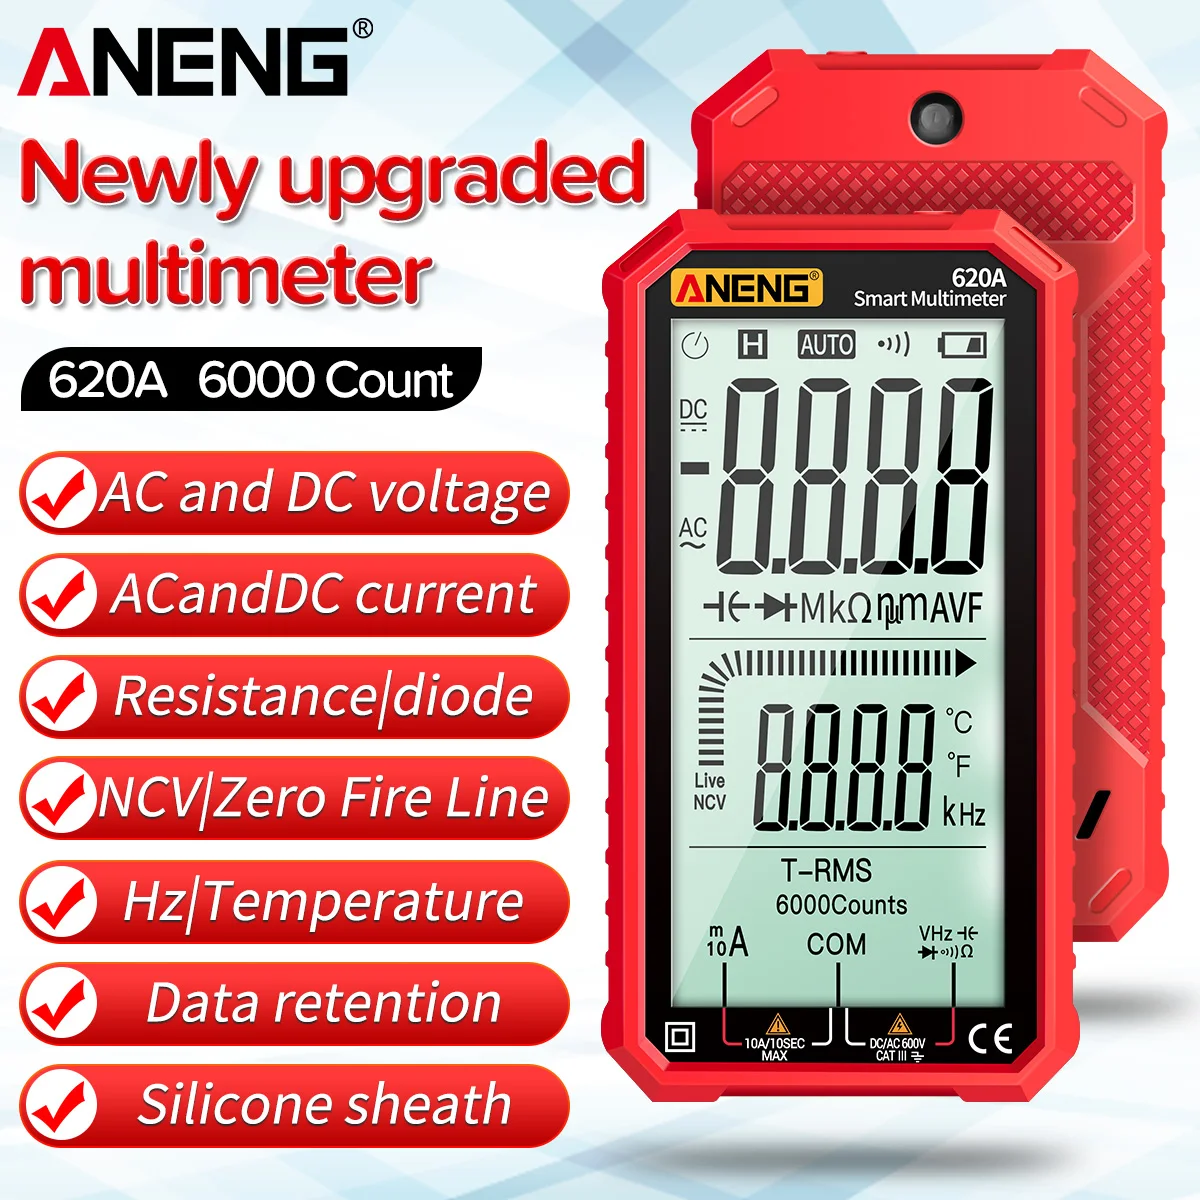 

ANENG 620A AC/DC Digital Multimeter Testerr Ultraportable True-RMS Multimeter Auto-Ranging Multi Tester with Amp Volt Ohm Tests